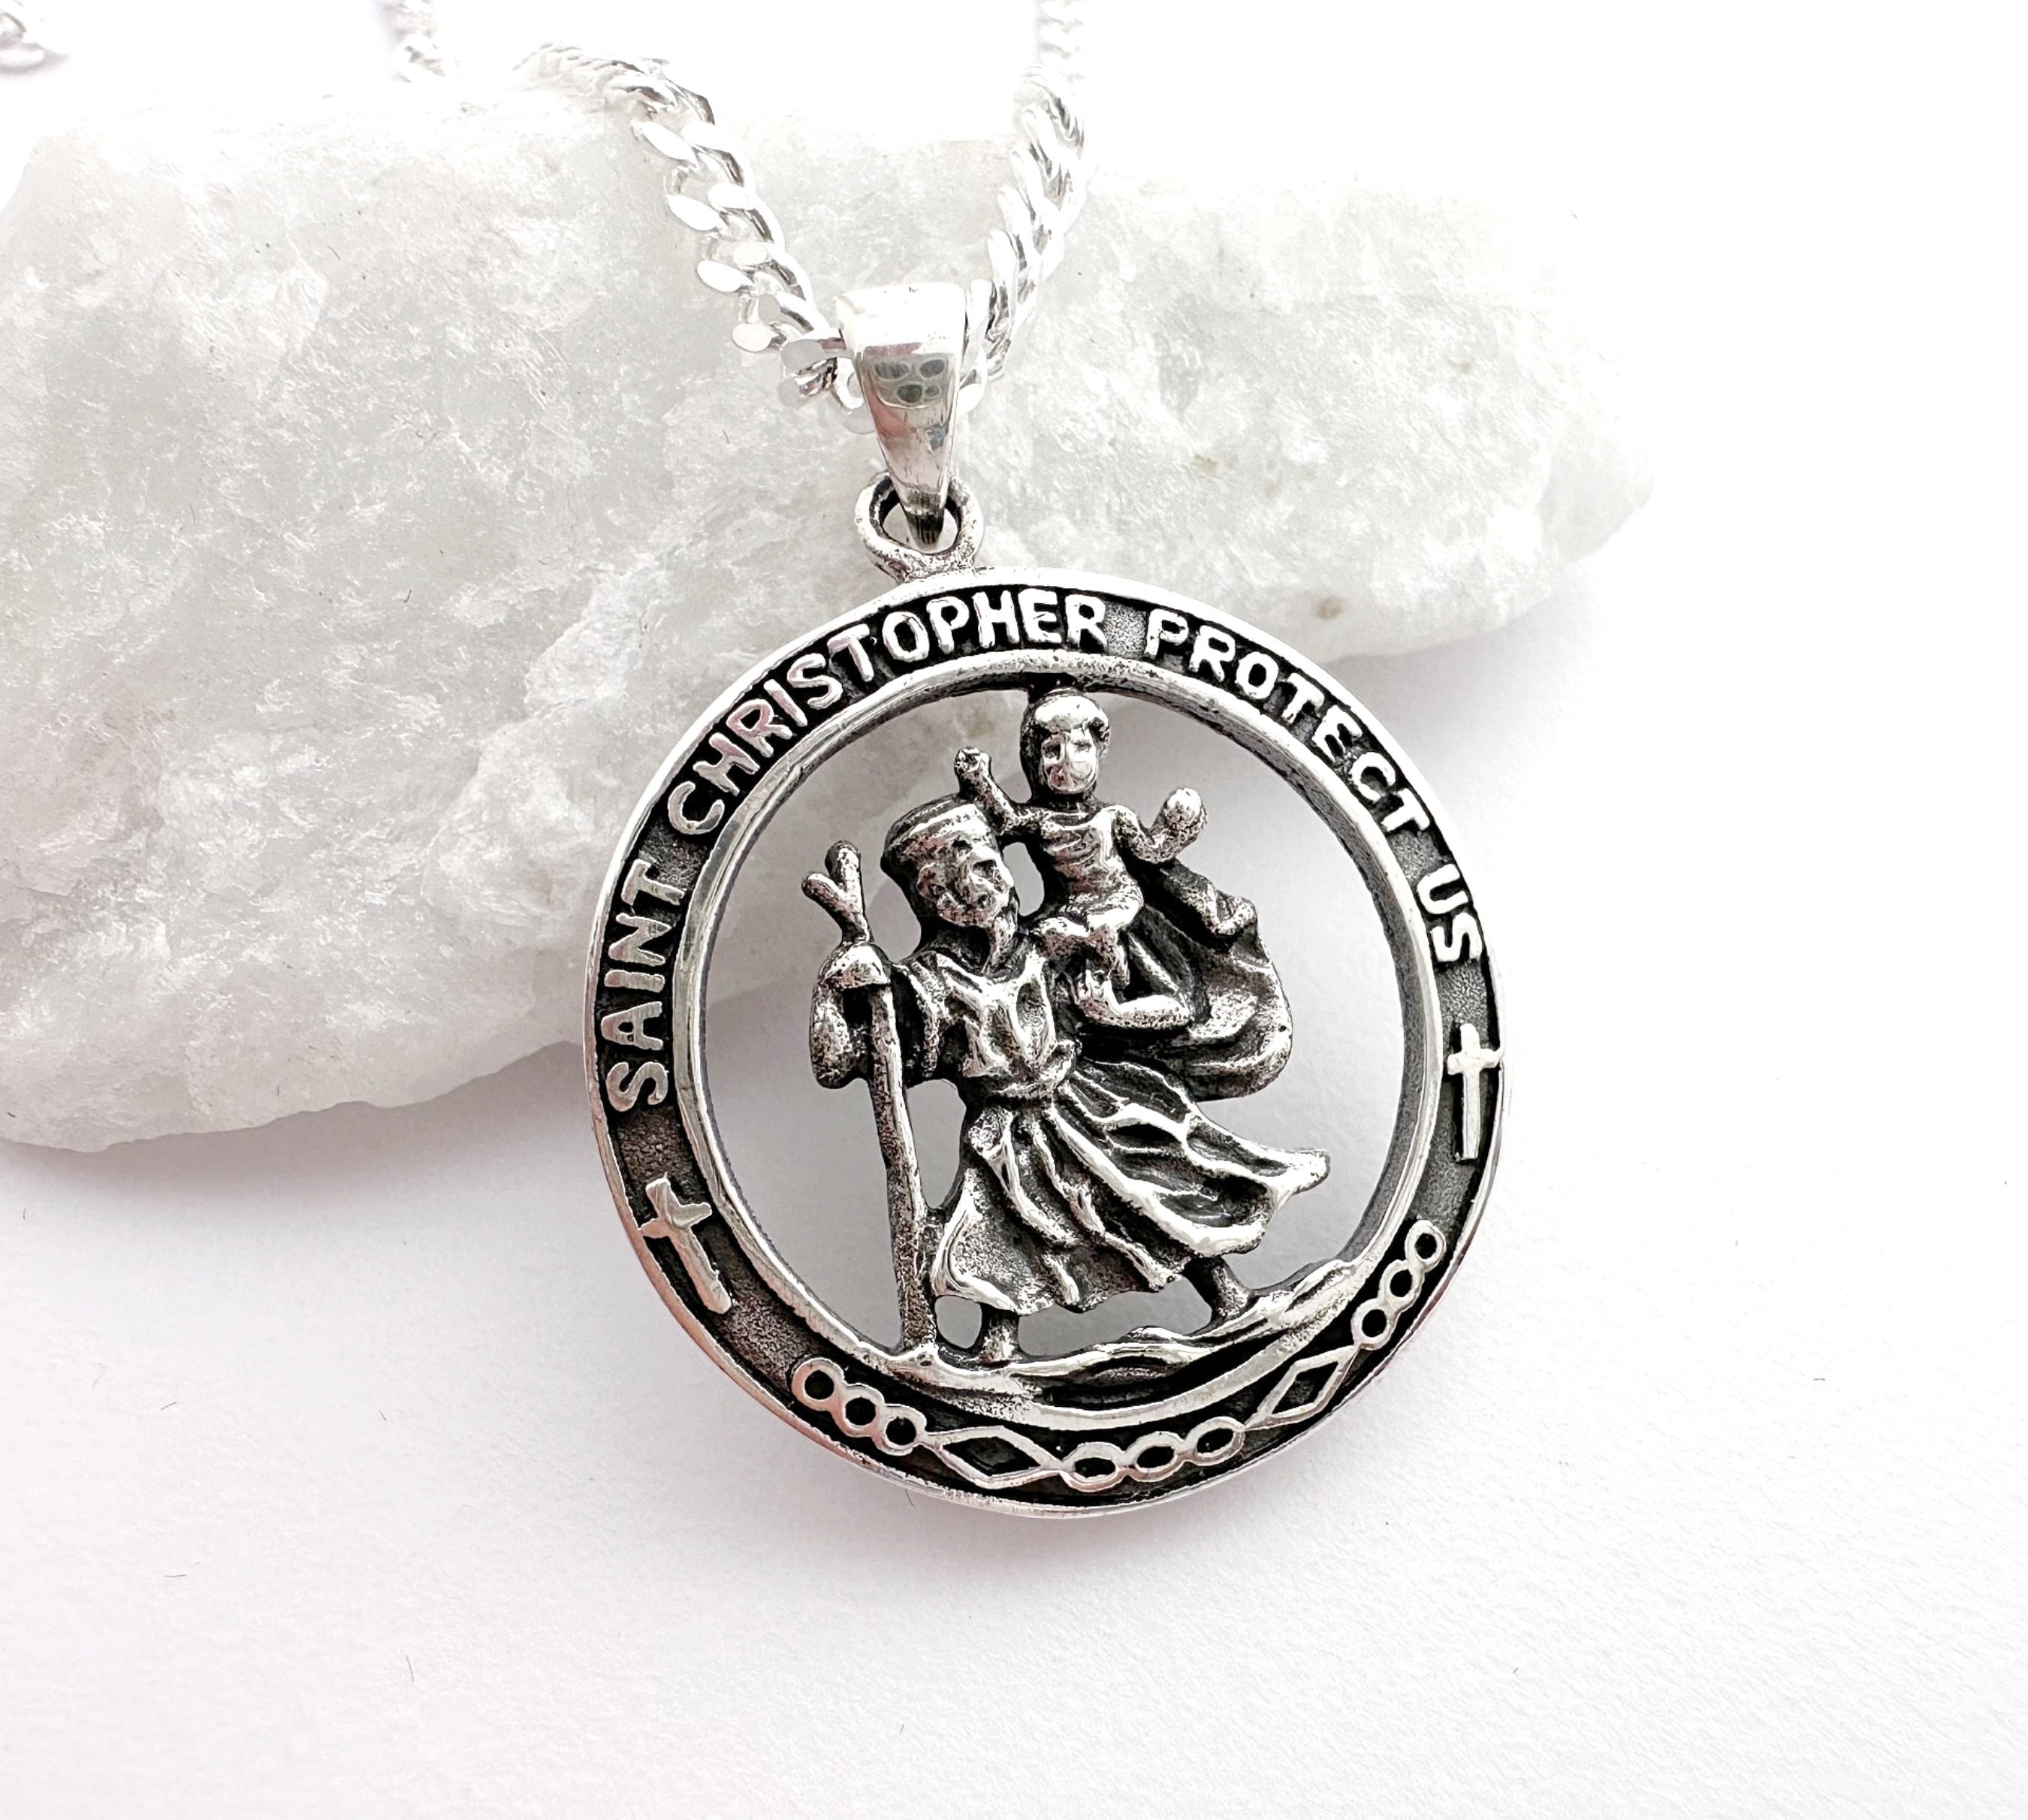 Saint Christopher Medal Pendant Necklace in Sterling Silver with Chain -  Walmart.com